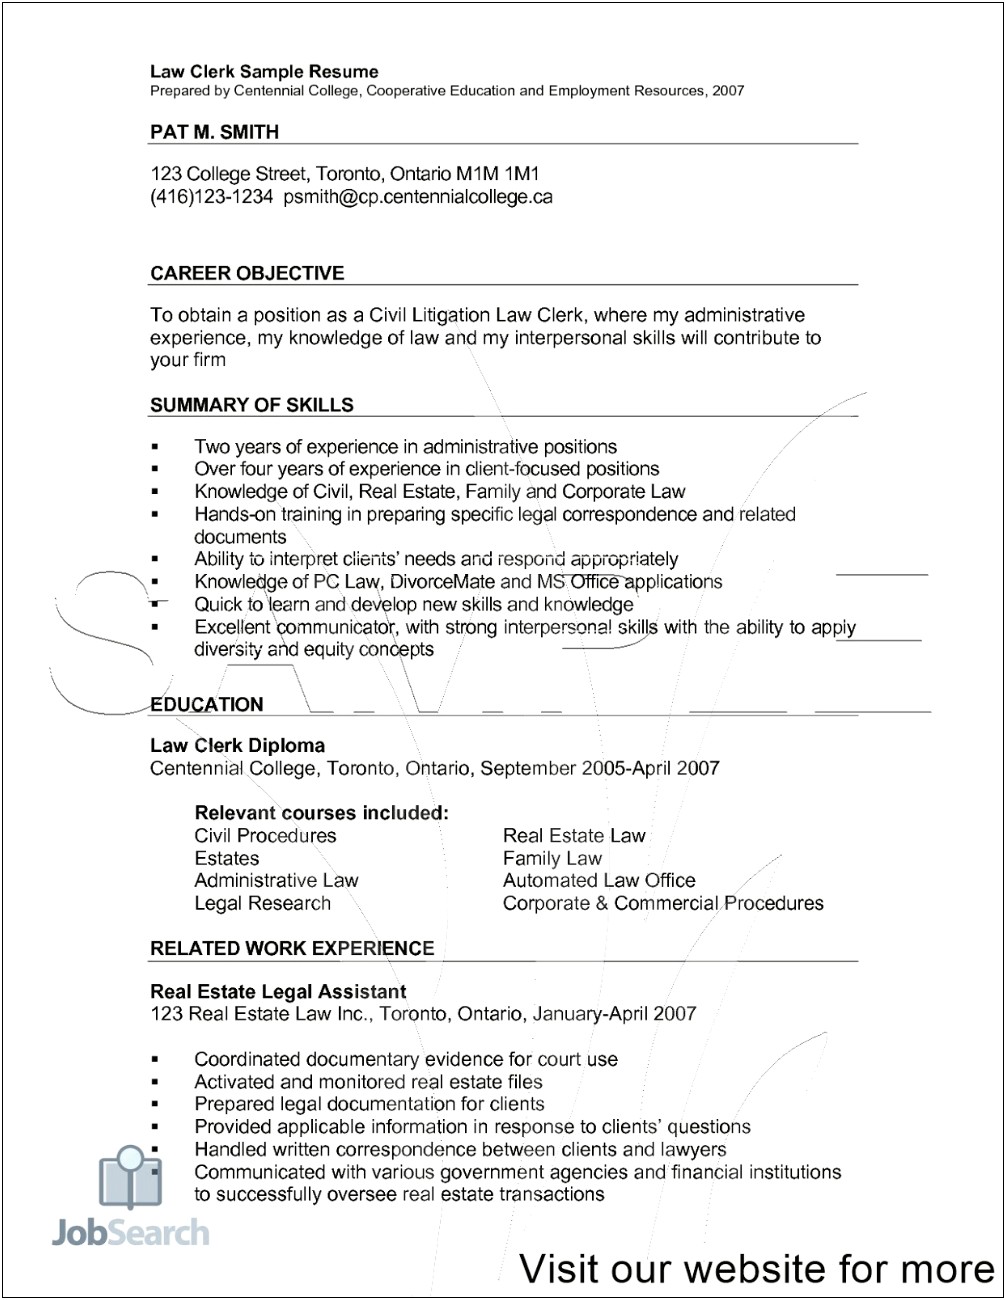 Resume Objective Statement Real Estate